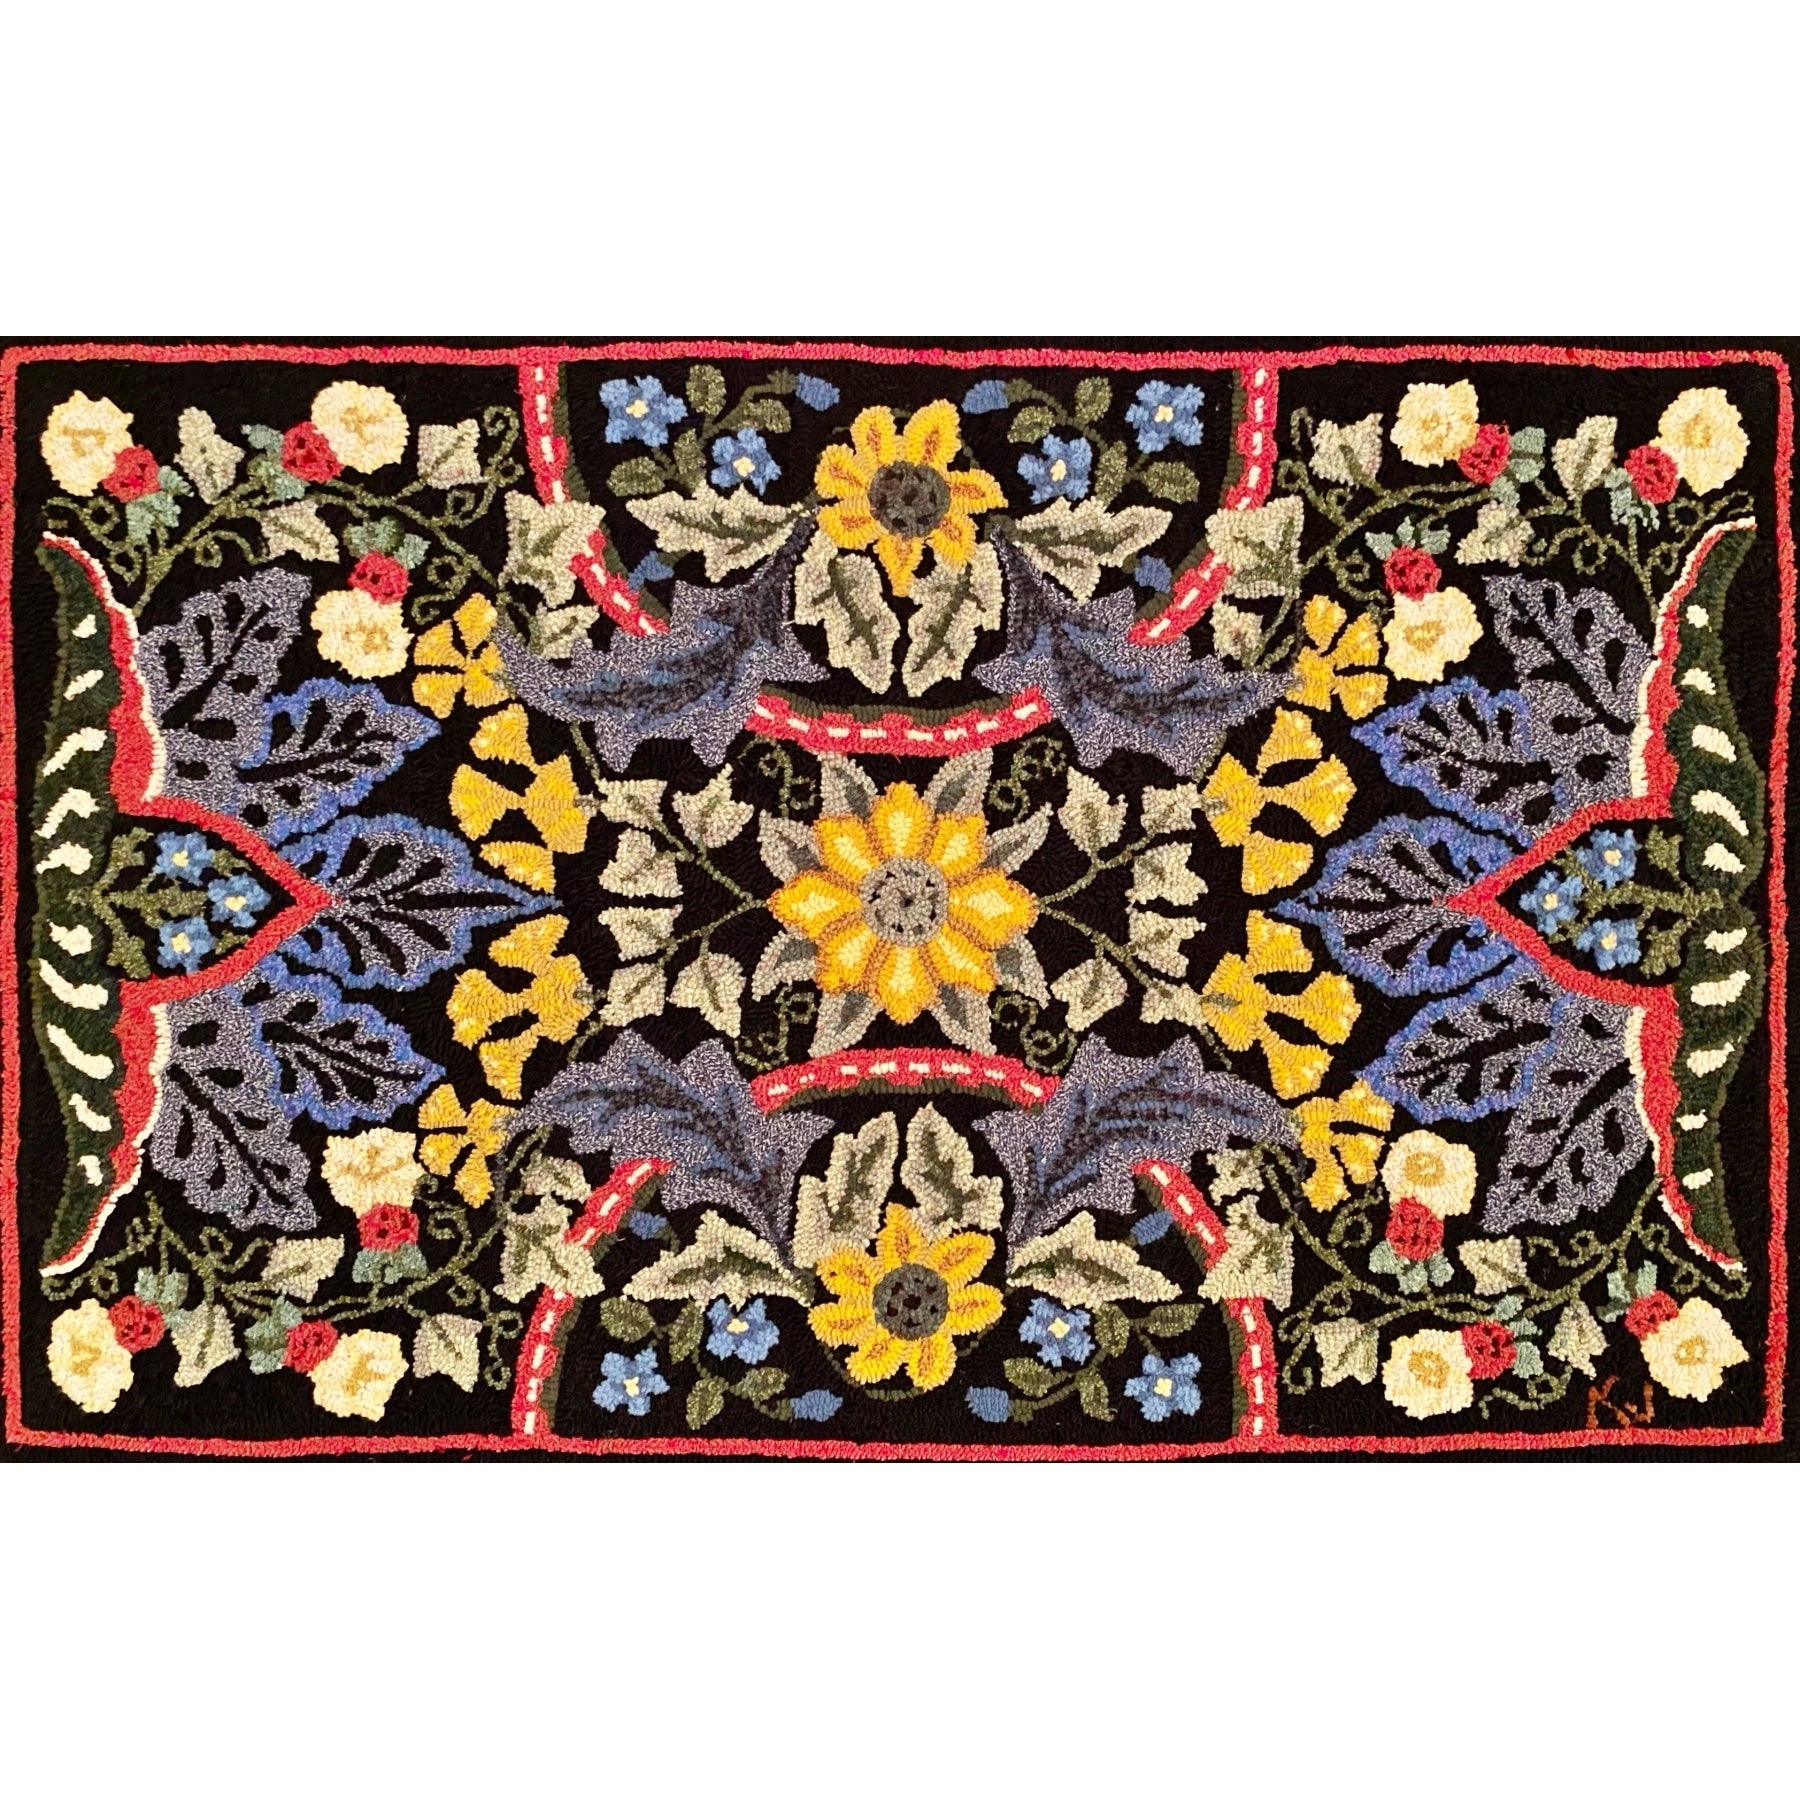 Morris Victorian, rug hooked by Krista Johnson